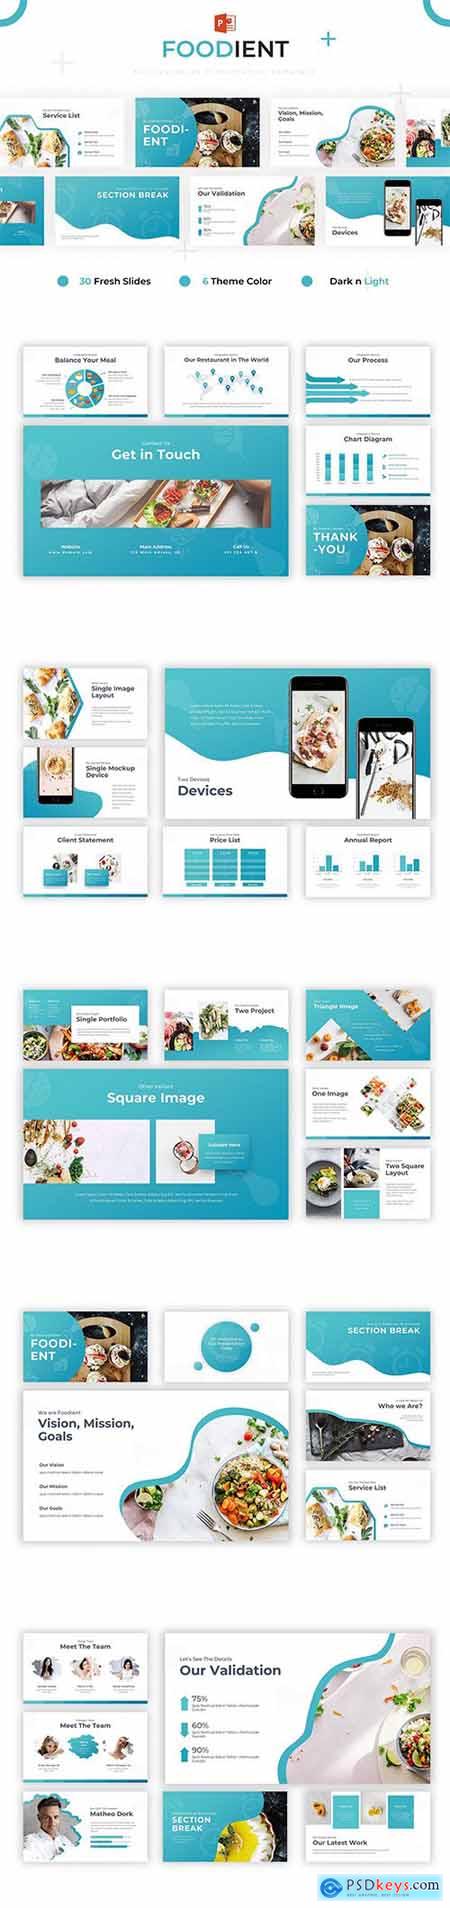 Foodient - Powerpoint Template